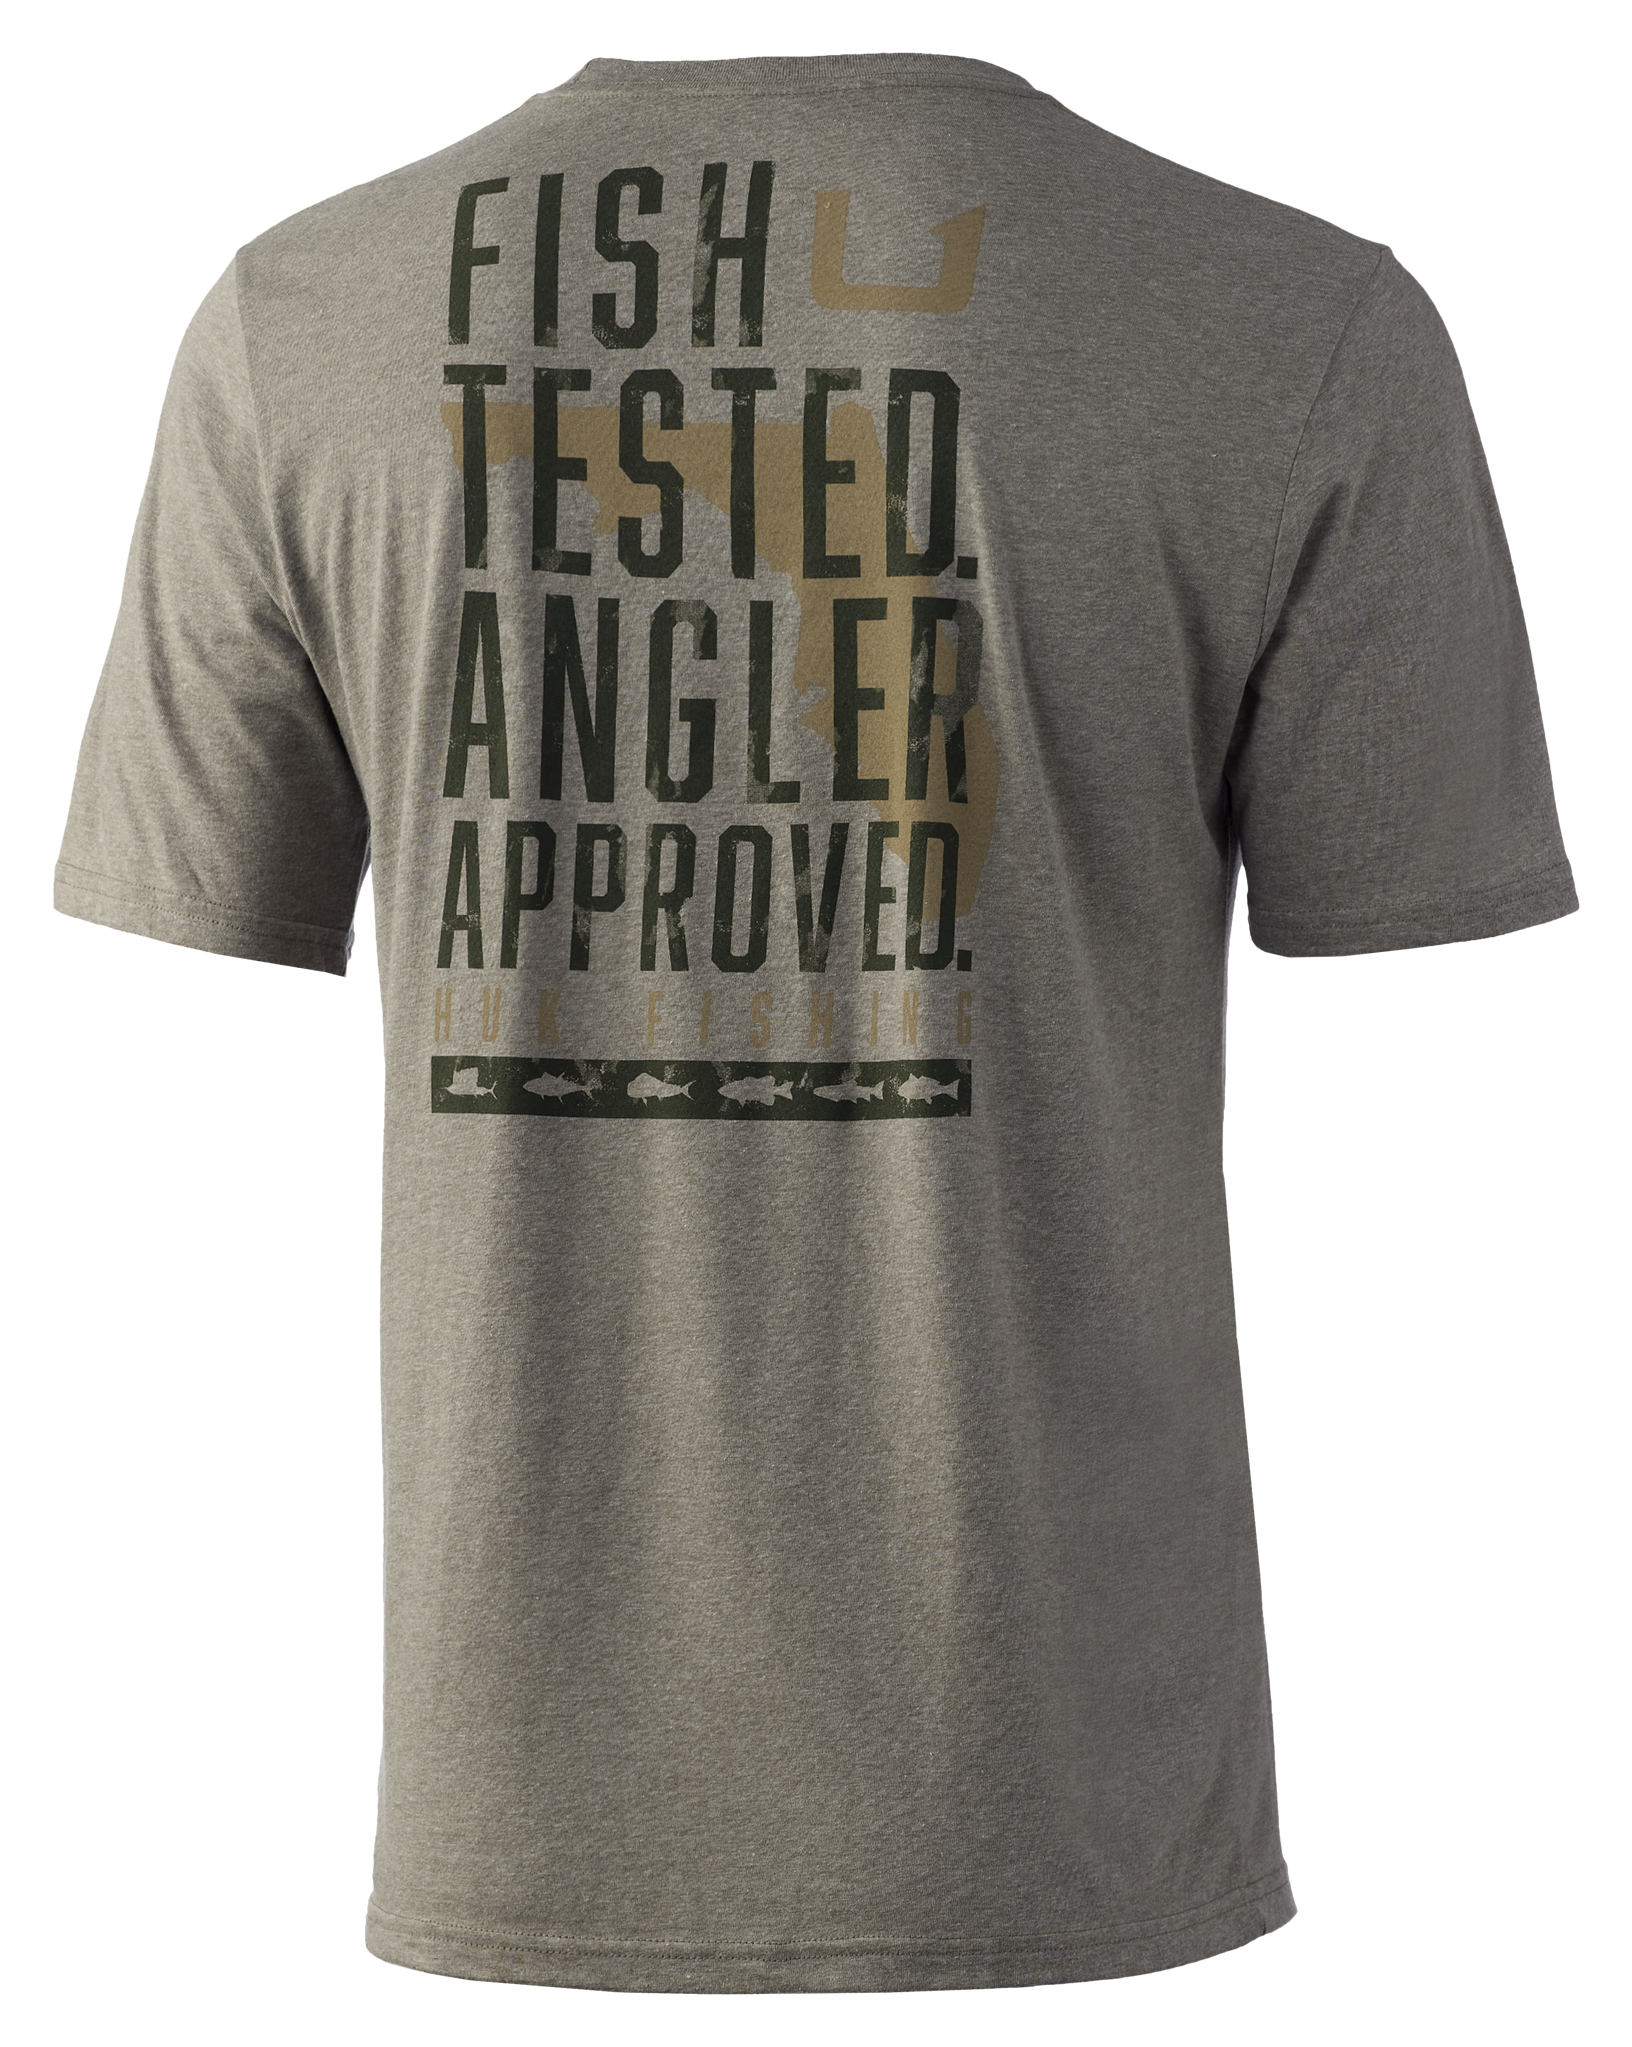 Huk Florida Tested and Approved Short-Sleeve T-Shirt for Men